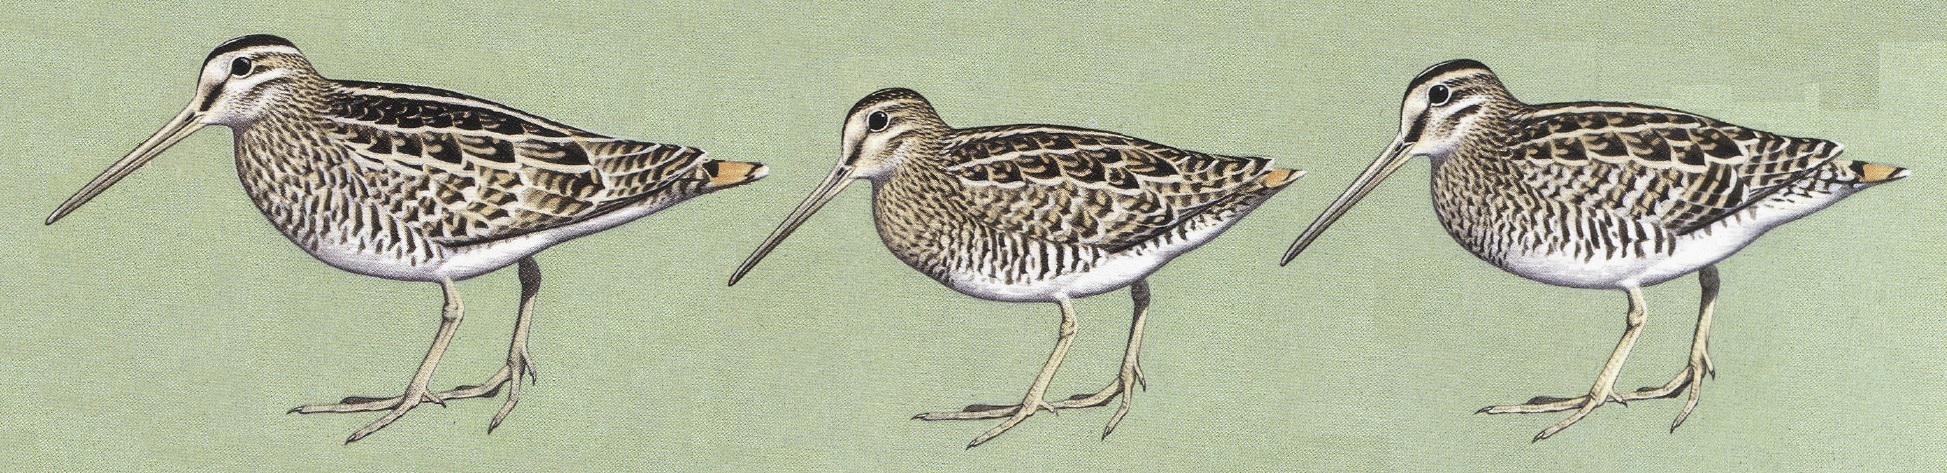 Snipes in Australia. From left to right: Latham's snipe, Pin-tailed snipe, Swinhoe's snipe. Images taken from the Hand